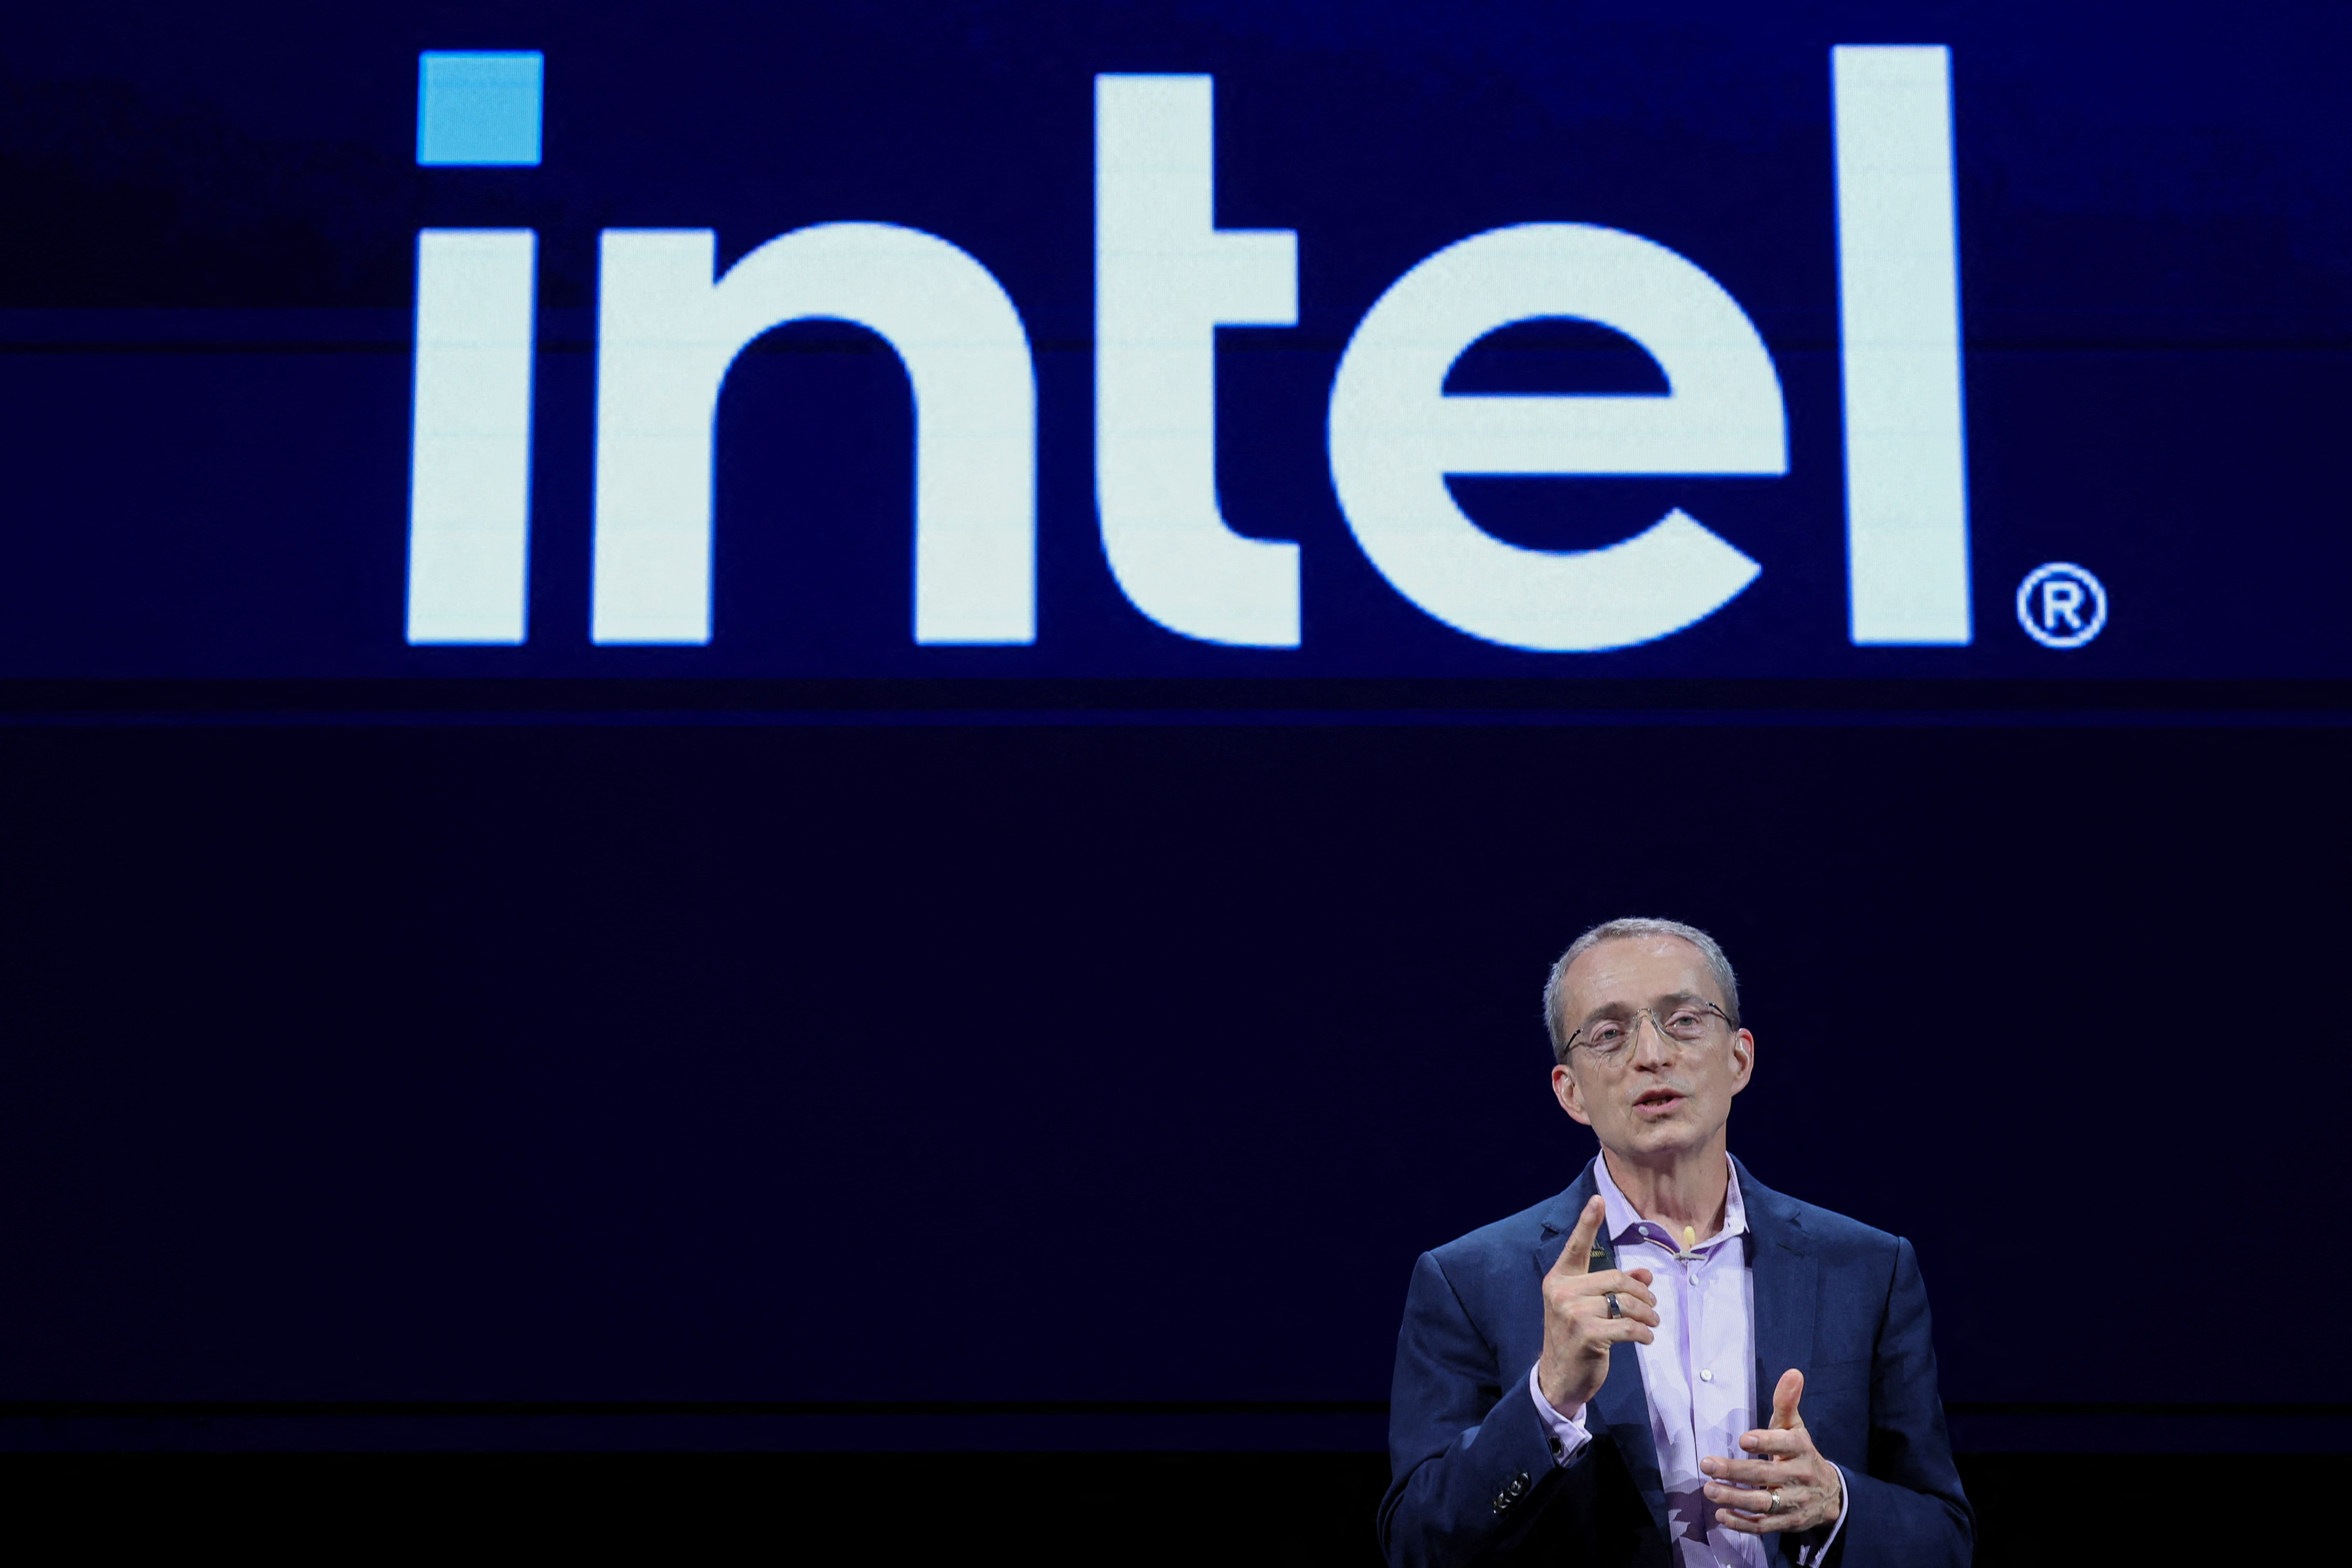 Intel CEO Pat Gelsinger delivers a speech at the COMPUTEX forum in Taipei